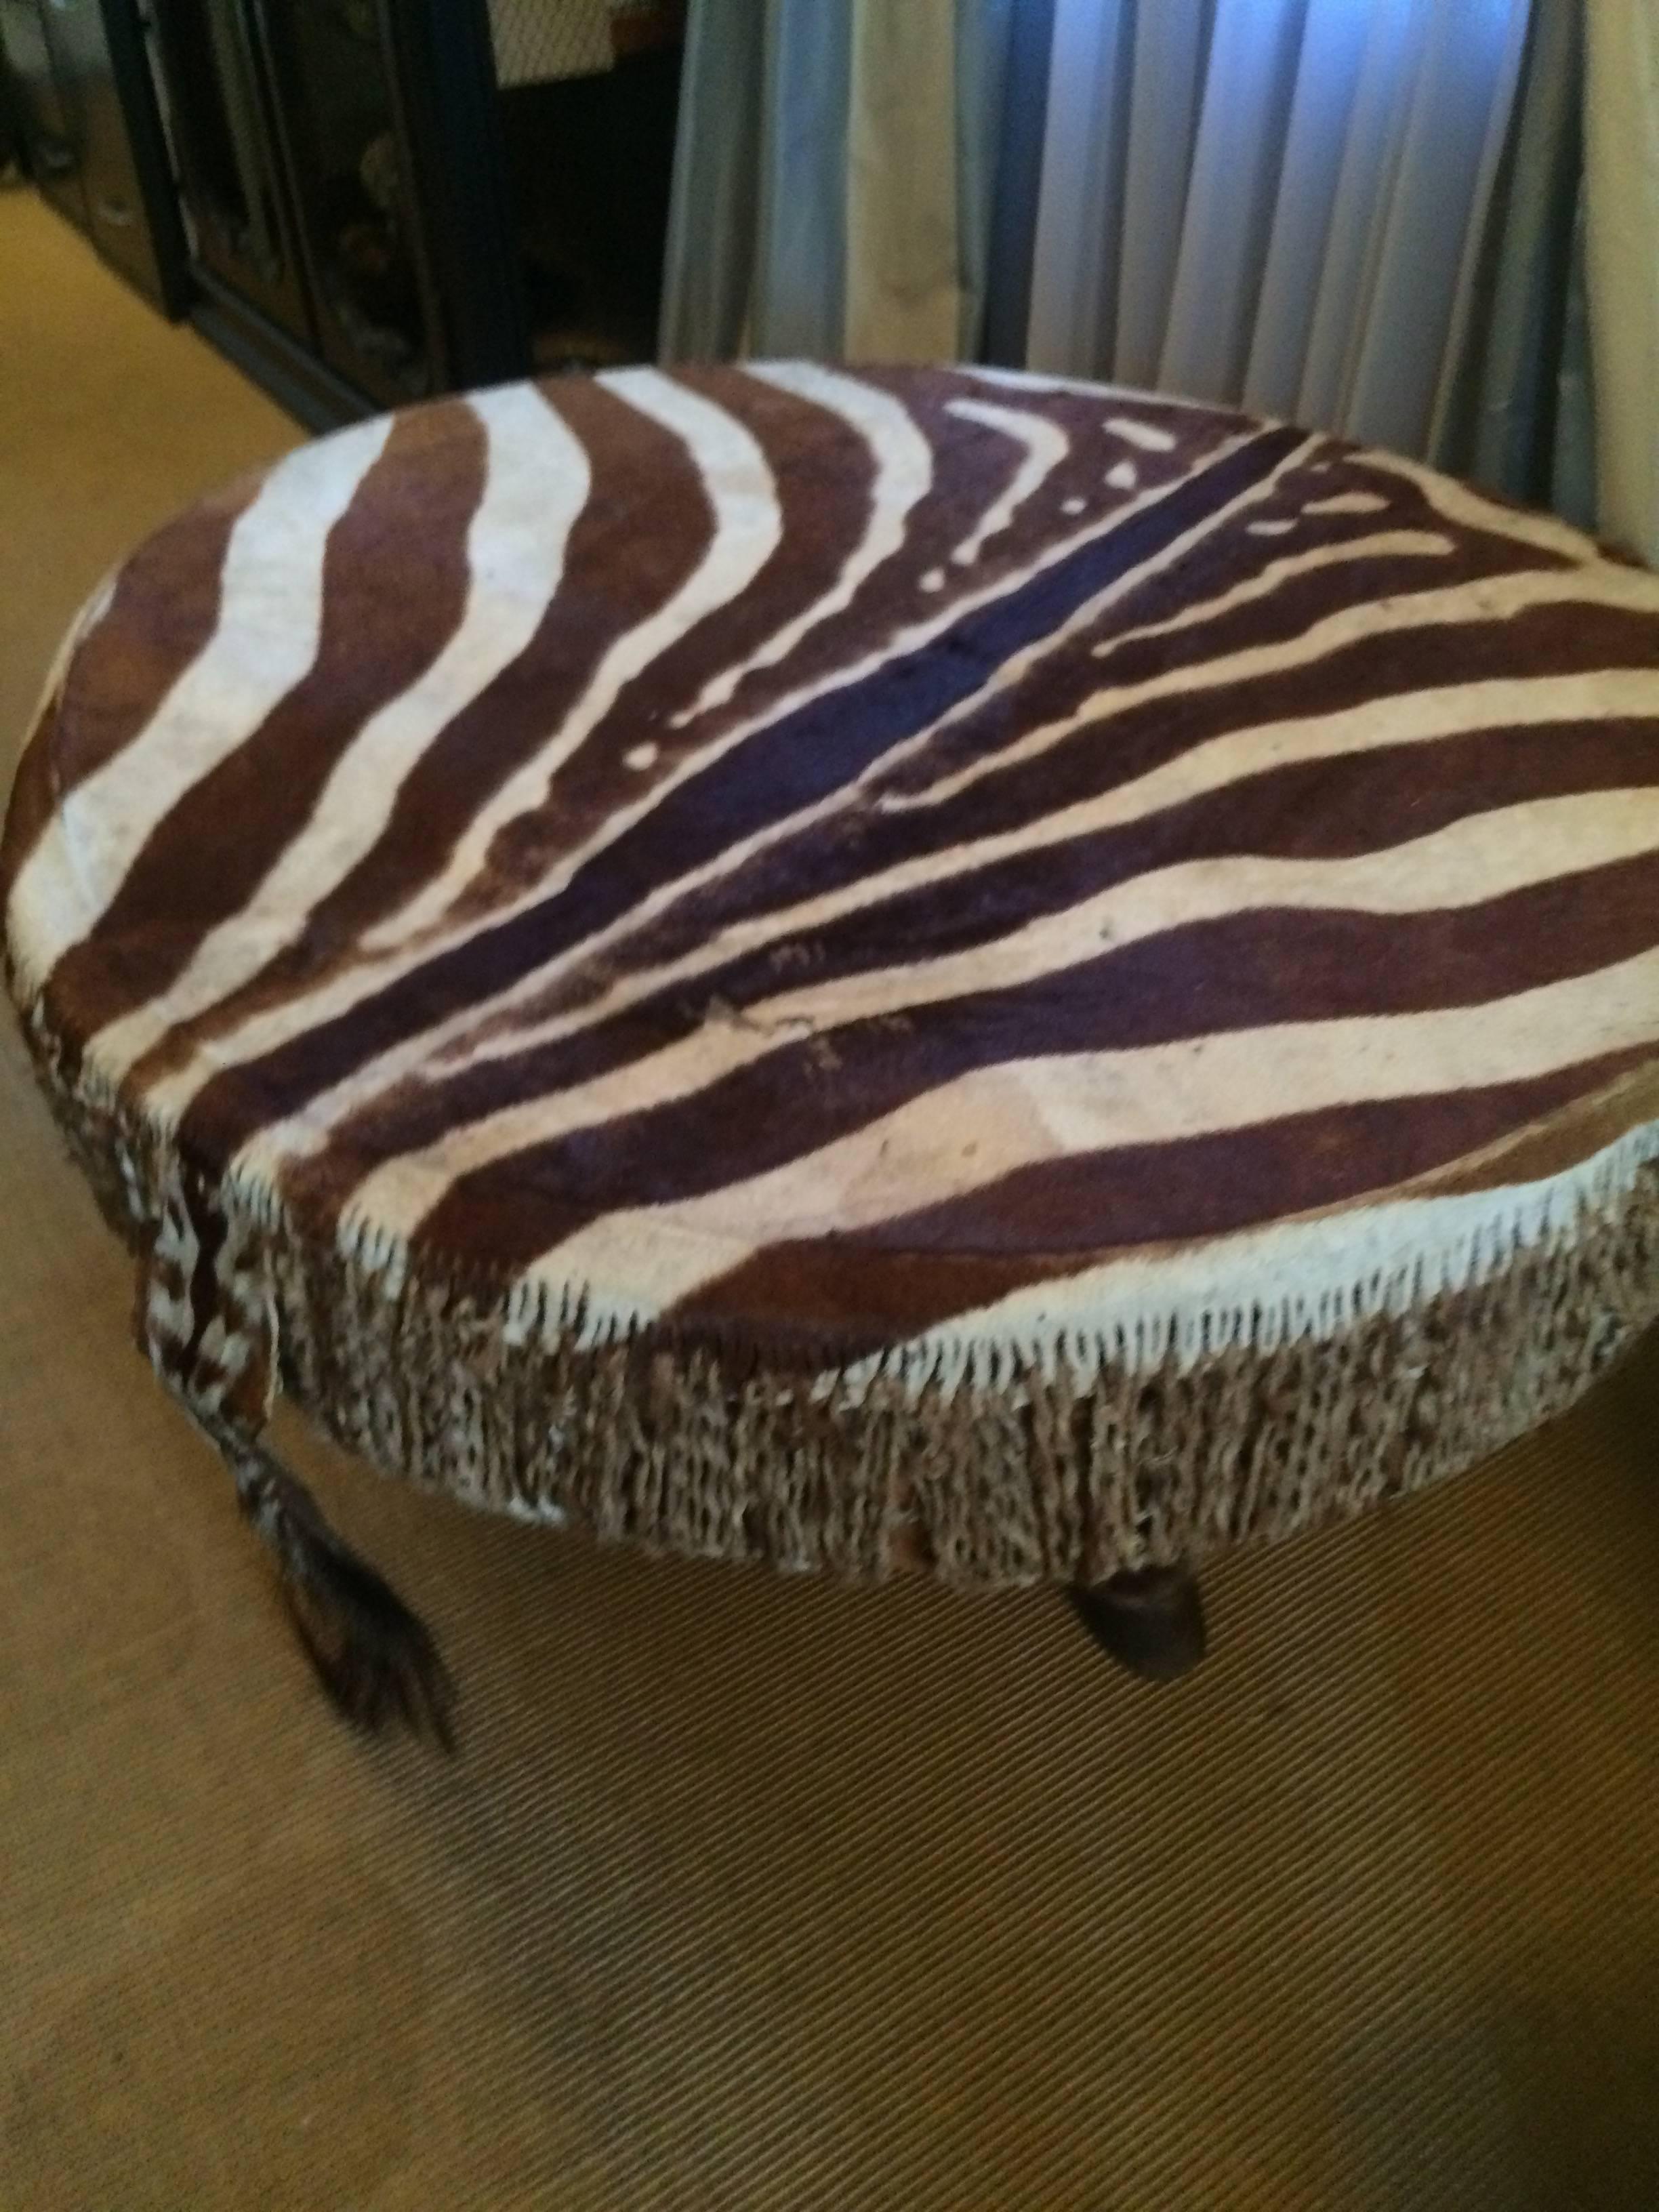 This is the piece that makes for a great conversation and adds depth to many interiors. Authentic zebra skin table in very good condition and ready for any room; 24